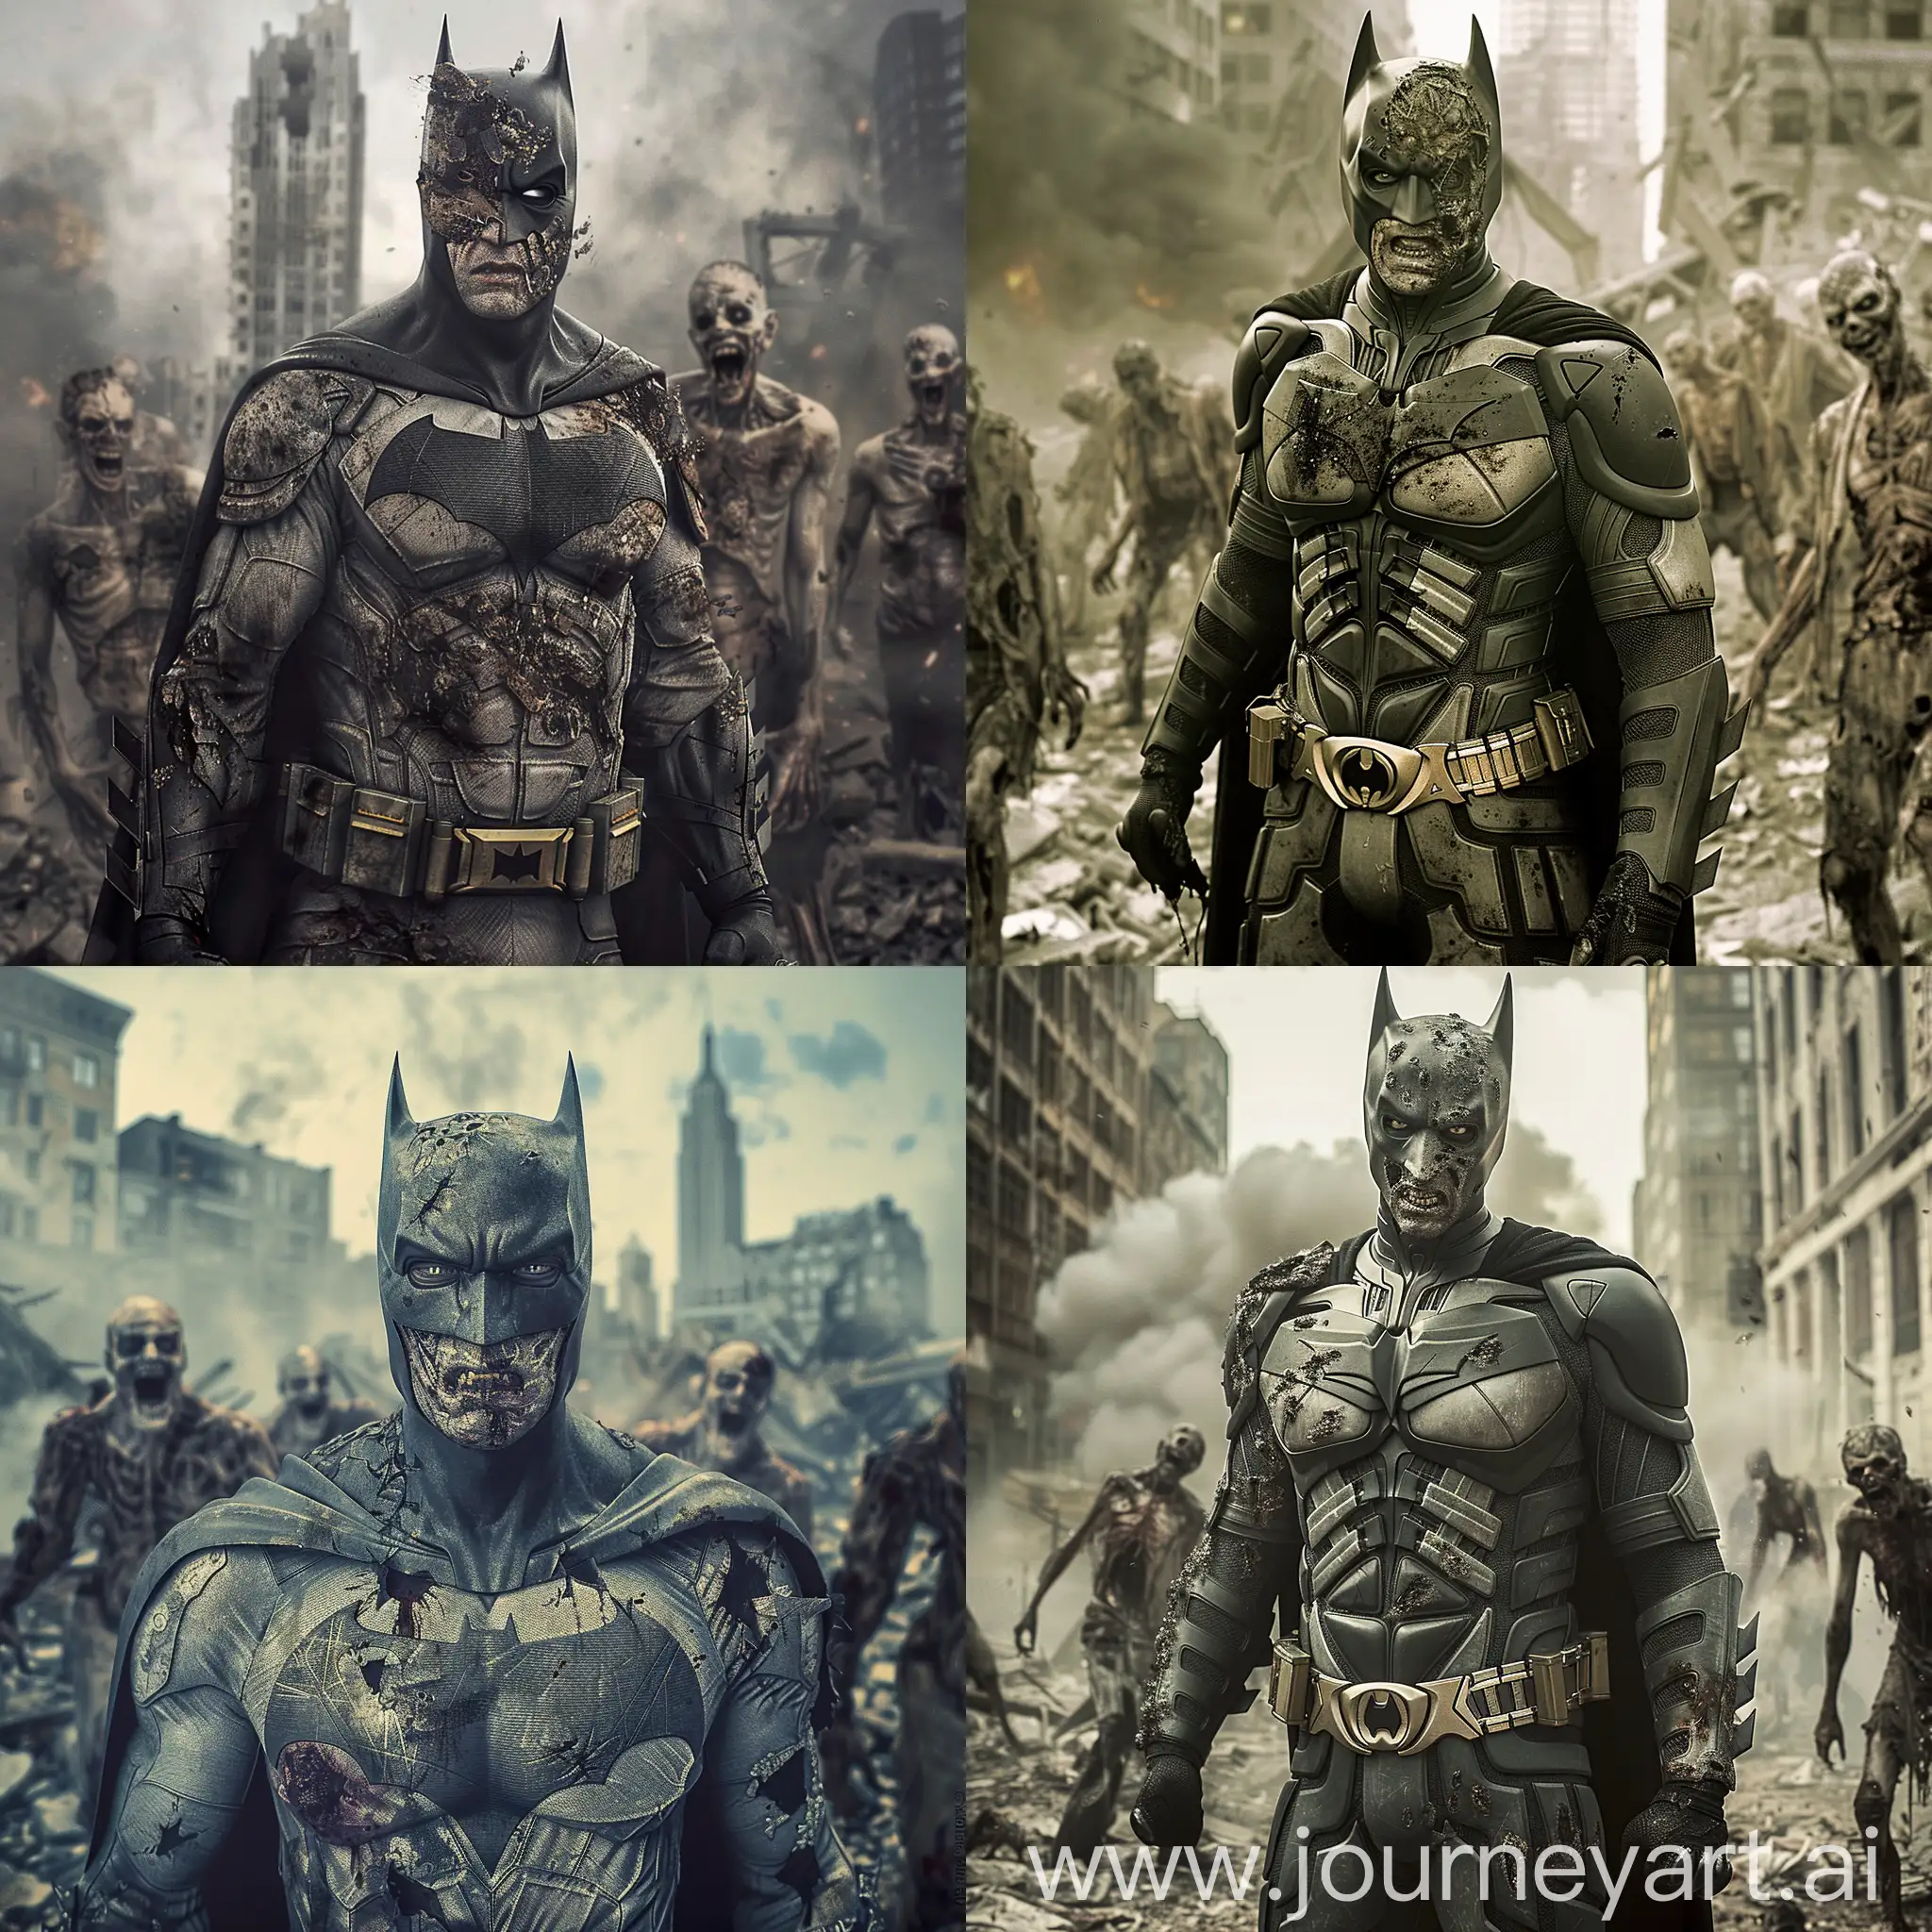 Batman has turned into a zombie and his face is scarred and strange and he is standing in front of the camera and he is tall and full body in the picture with his torn and dirty clothes, there are some other zombies behind him and the city around them is in ruins,real